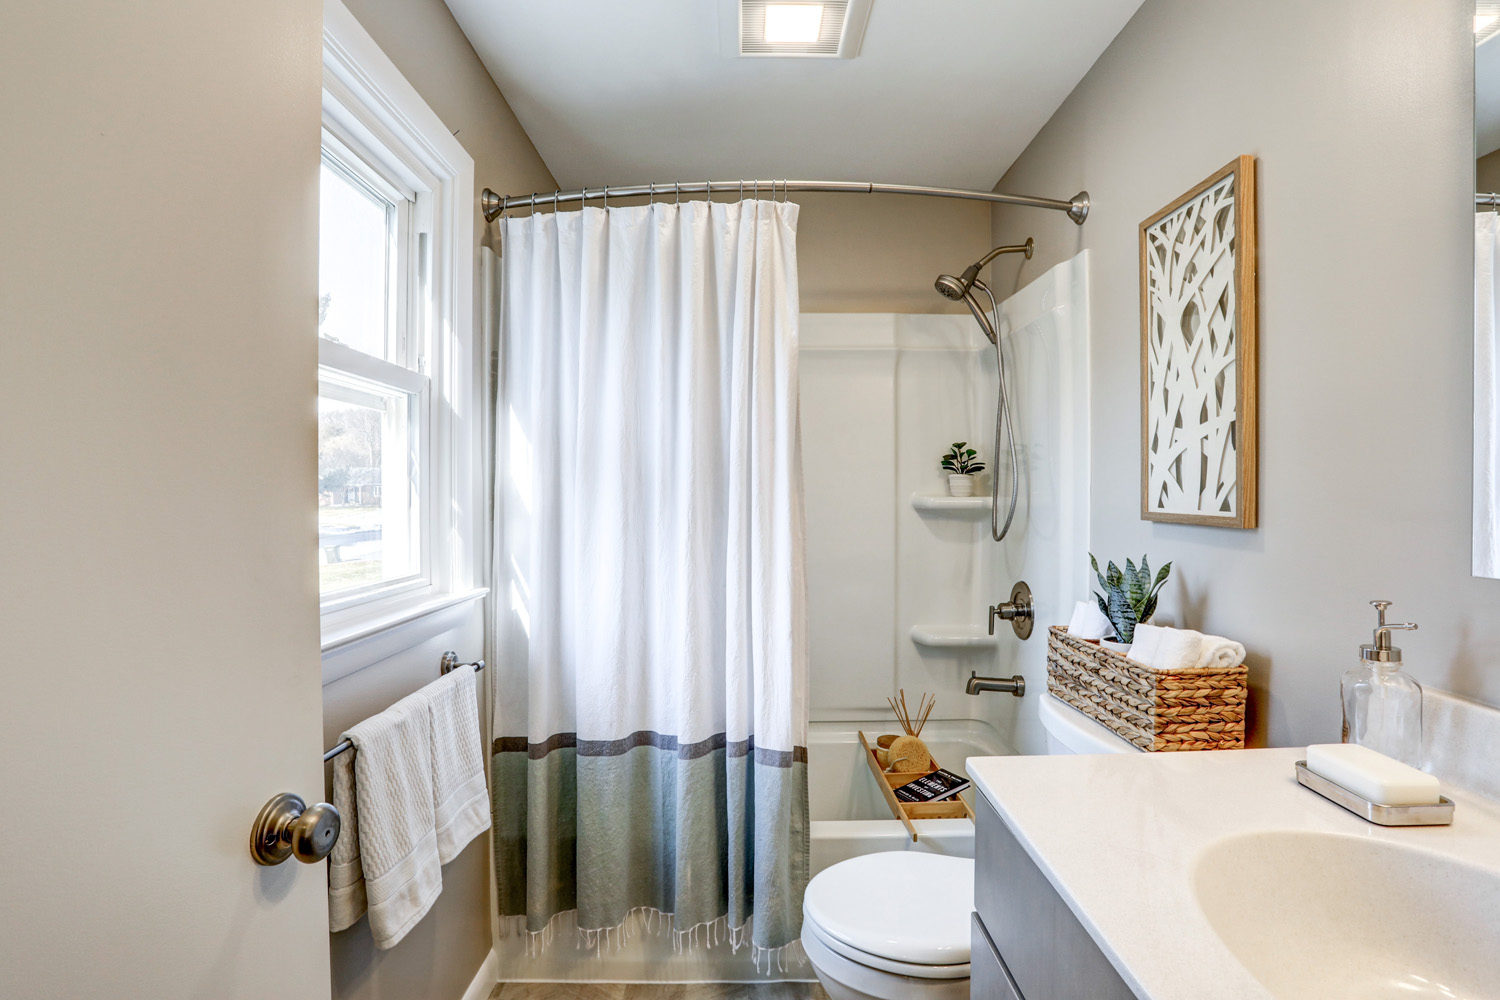 Manheim Township Bathroom Remodel with bathtub and shower combination